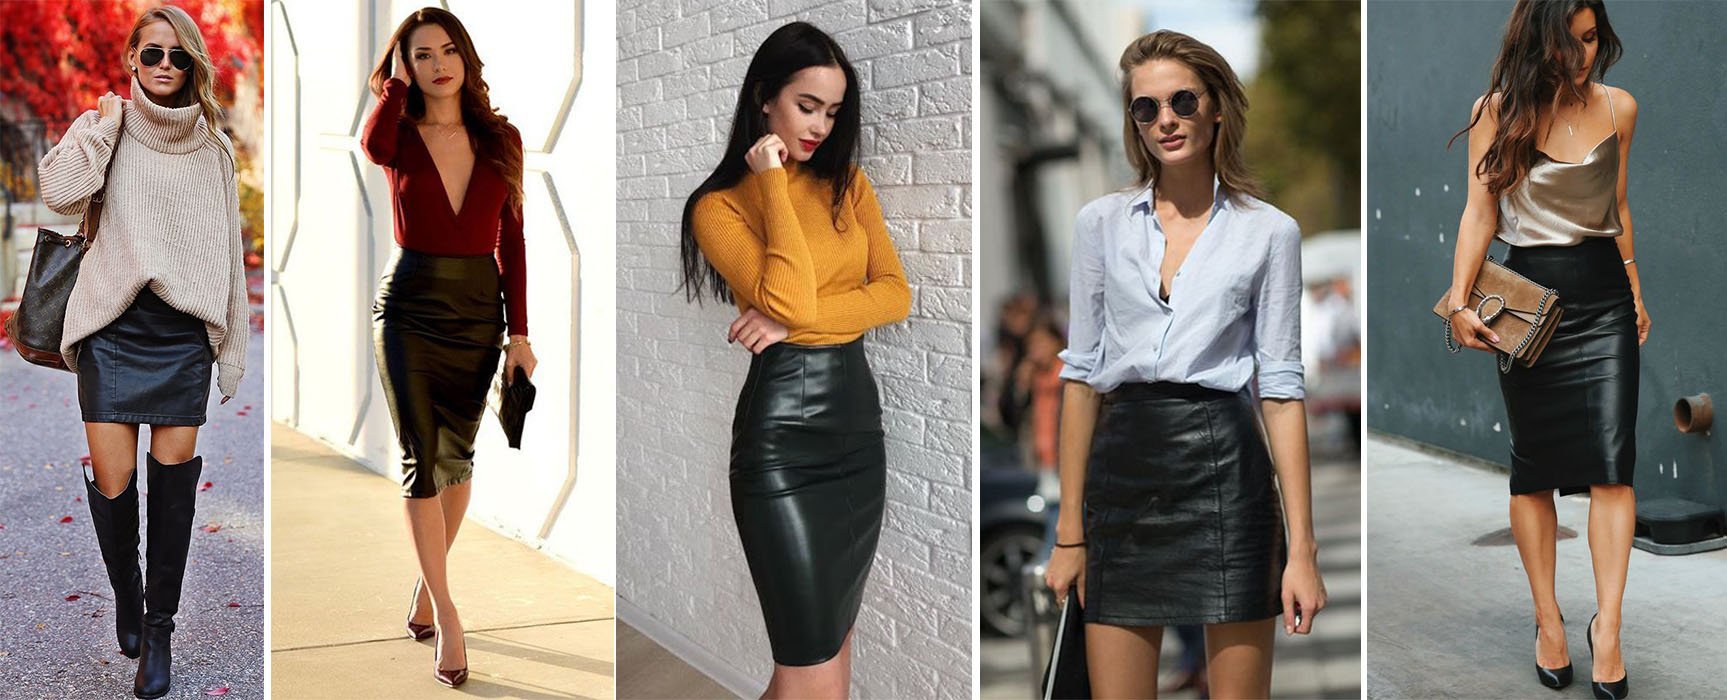 HOW TO WEAR A LEATHER SKIRT WHILE REMAINING SOPHISTICATED?